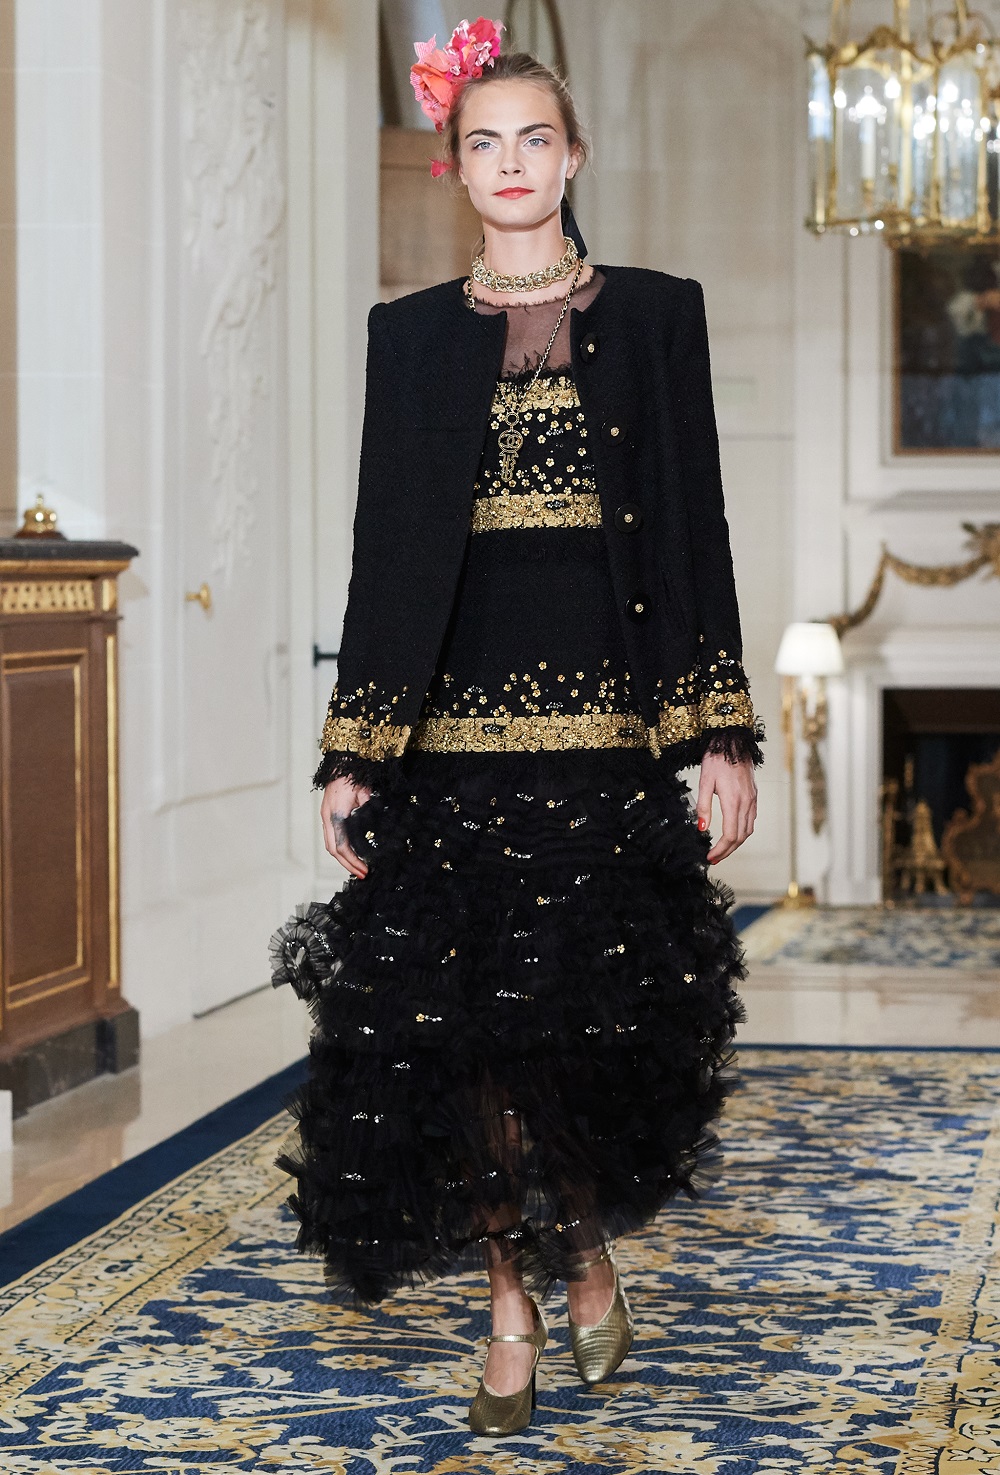 Cara Delevingne on the runway at Chanel's pre-fall 2017 collection at The Ritz